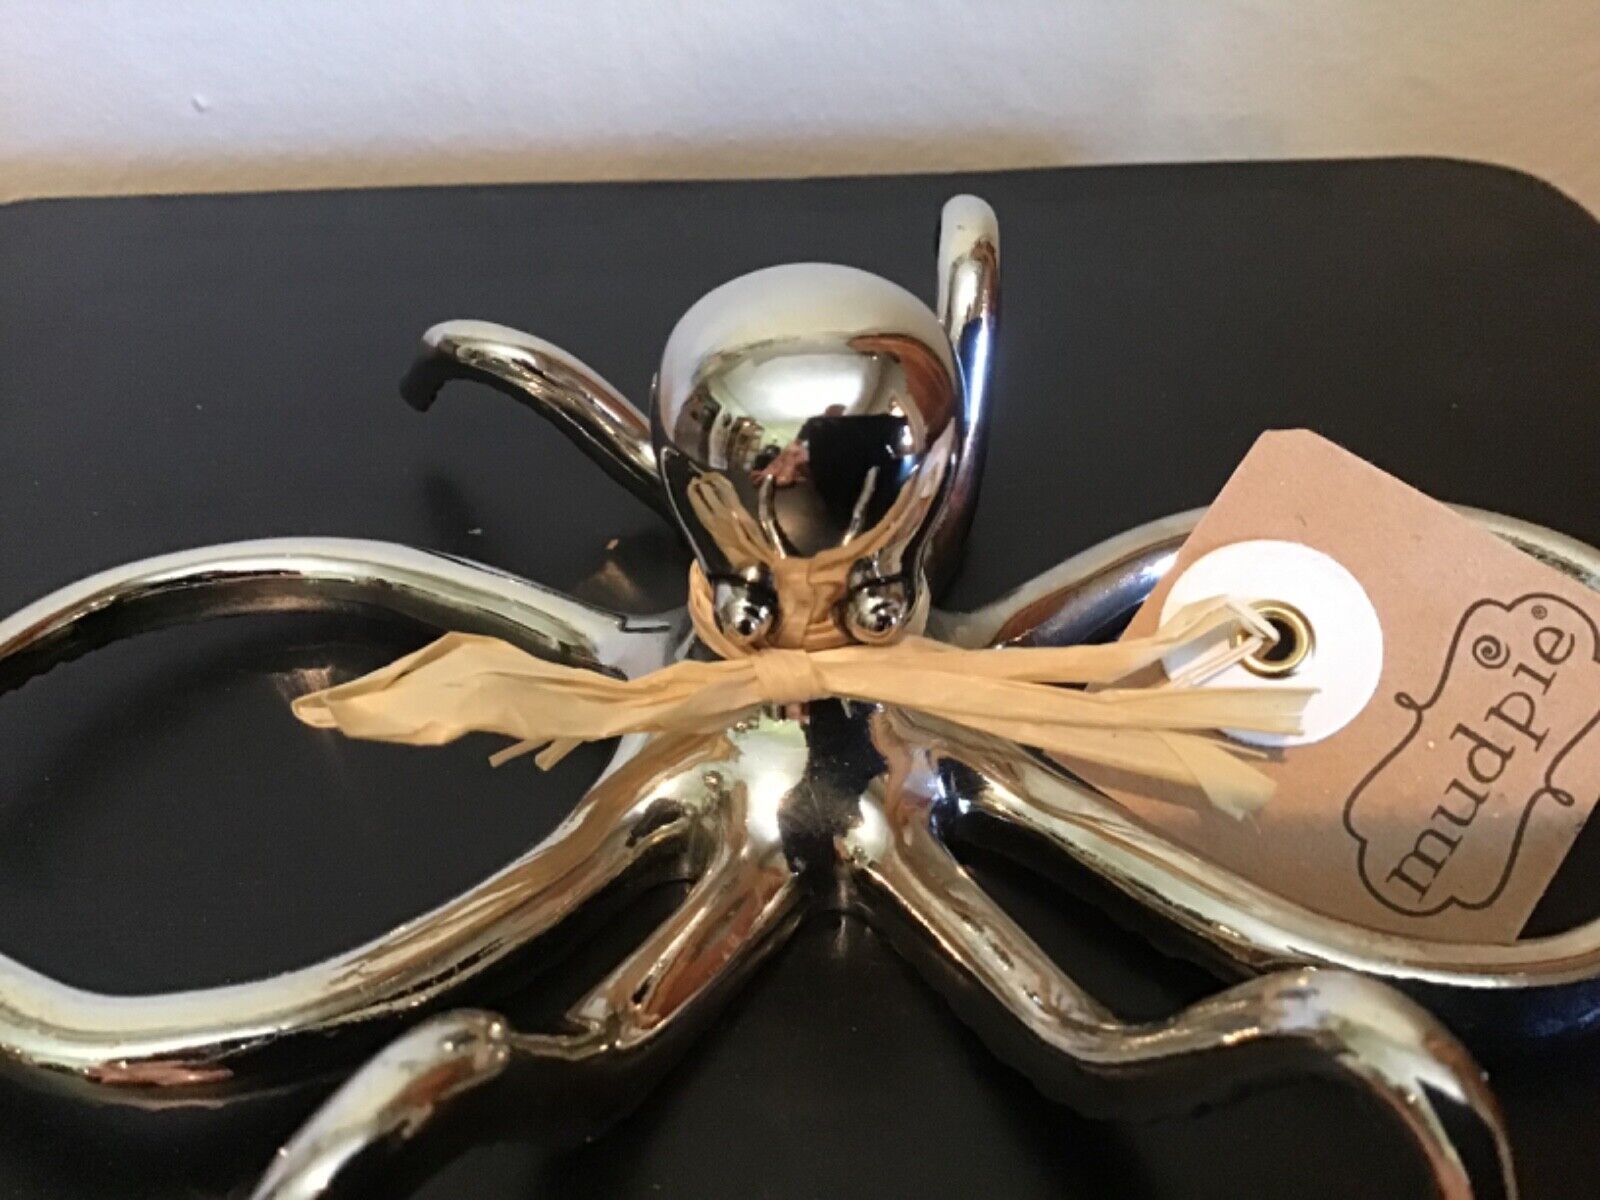 Hard-to-Find MUD PIE Shiny Metal OCTOPUS Art Sculpture Paperweight with Hang Tag